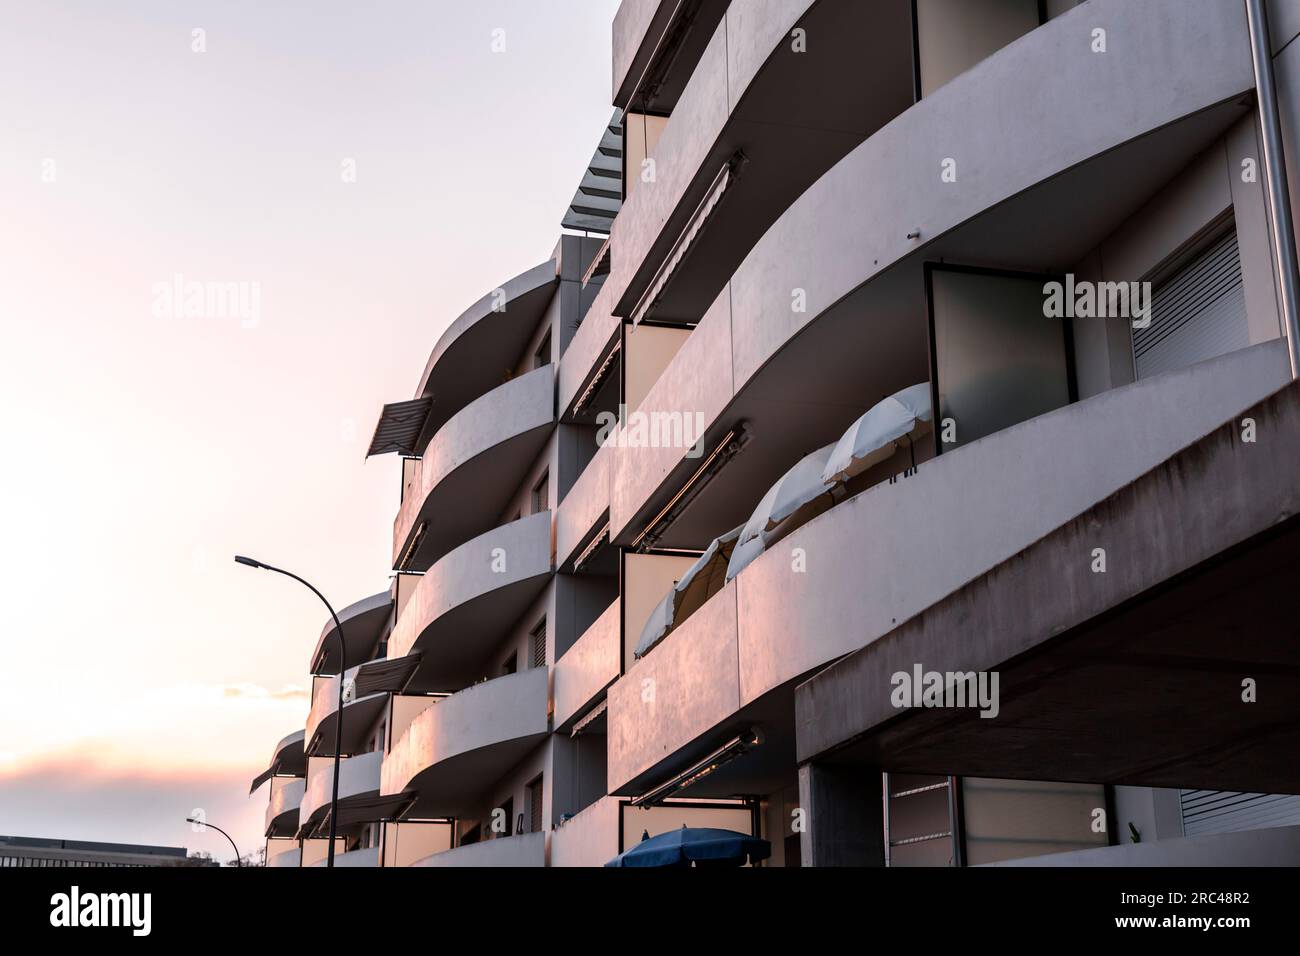 Generic architecture and street view from Geneva, Switzerland on March 25. Stock Photo